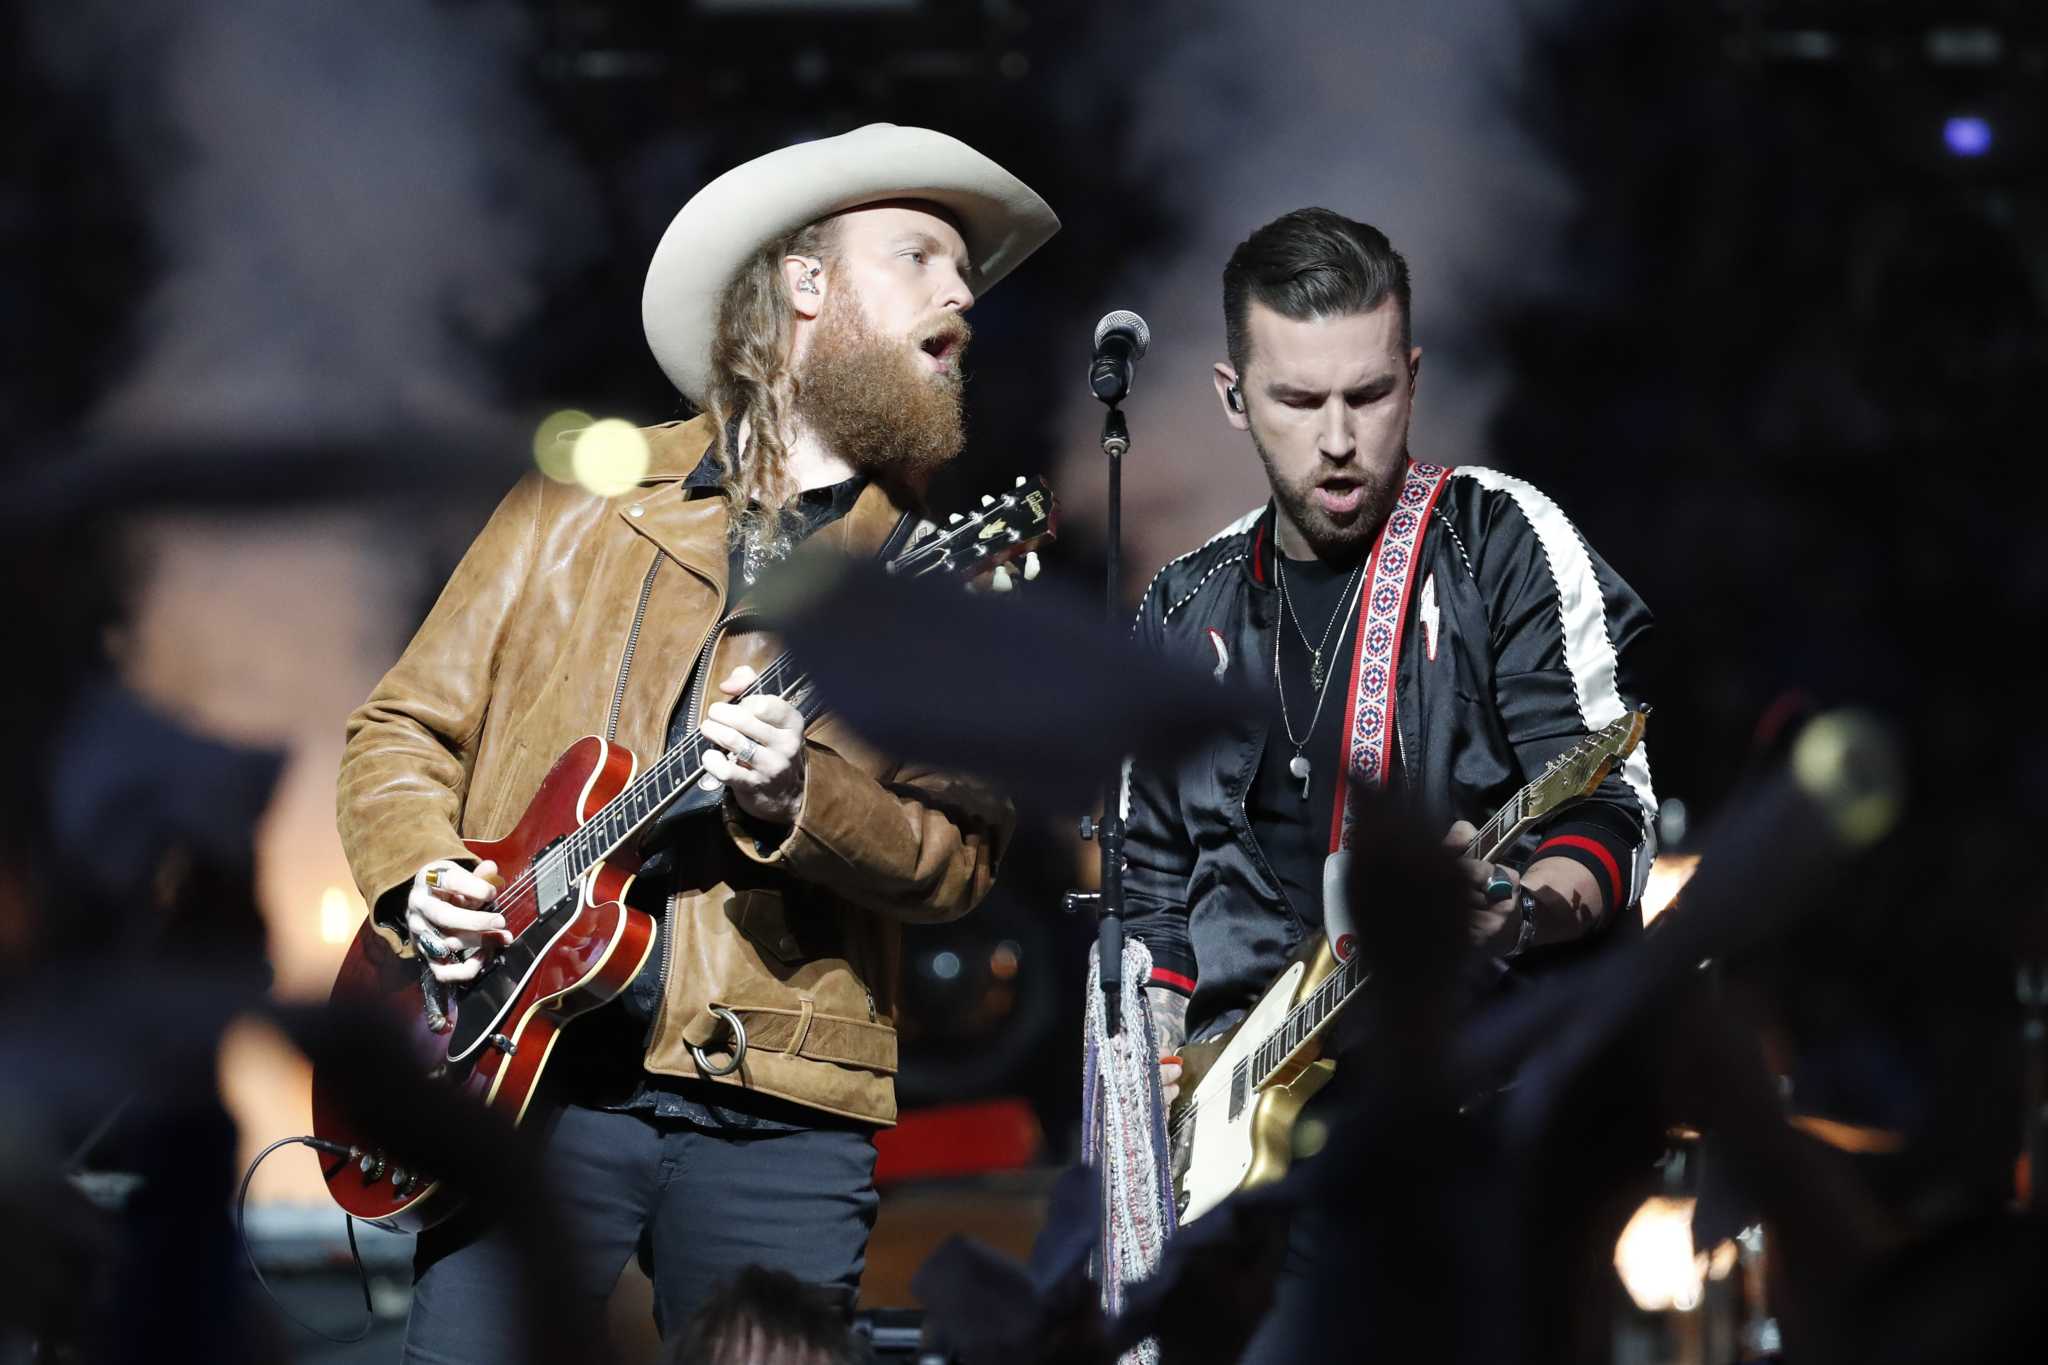 Concert review: Brothers Osborne electrifying, revealing at lively Palace show - Albany Times Union